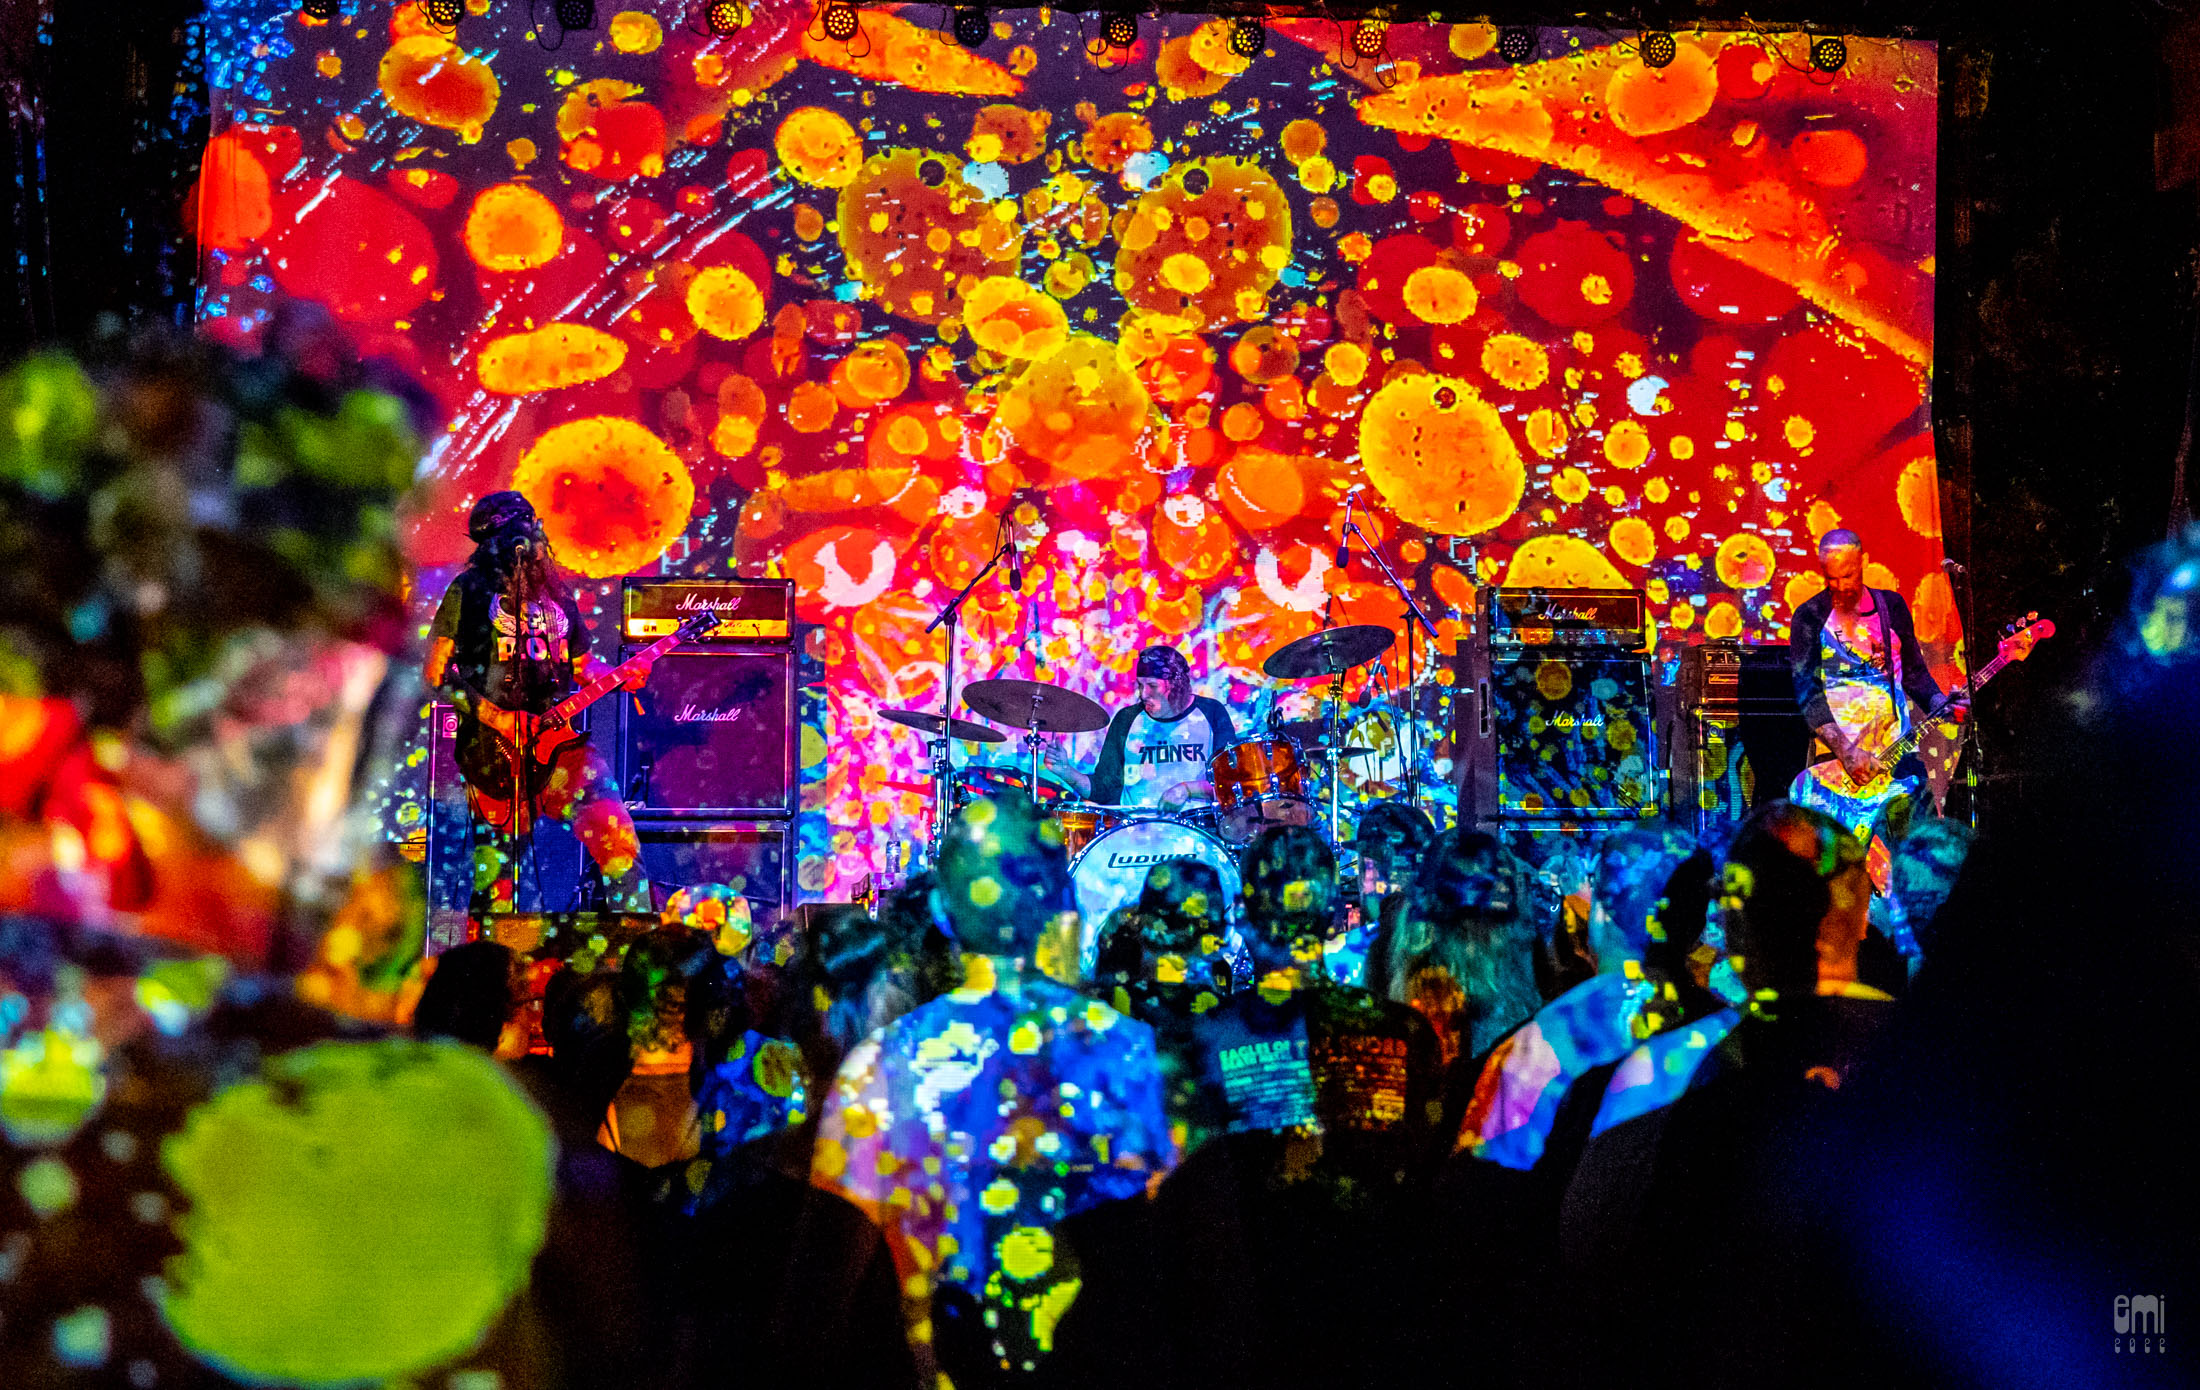 20220723 Stöner with Mad Alchemy Liquid Light Show at RippleFest Texas 2022, The Far Out Lounge, Austin TX. photo by emi